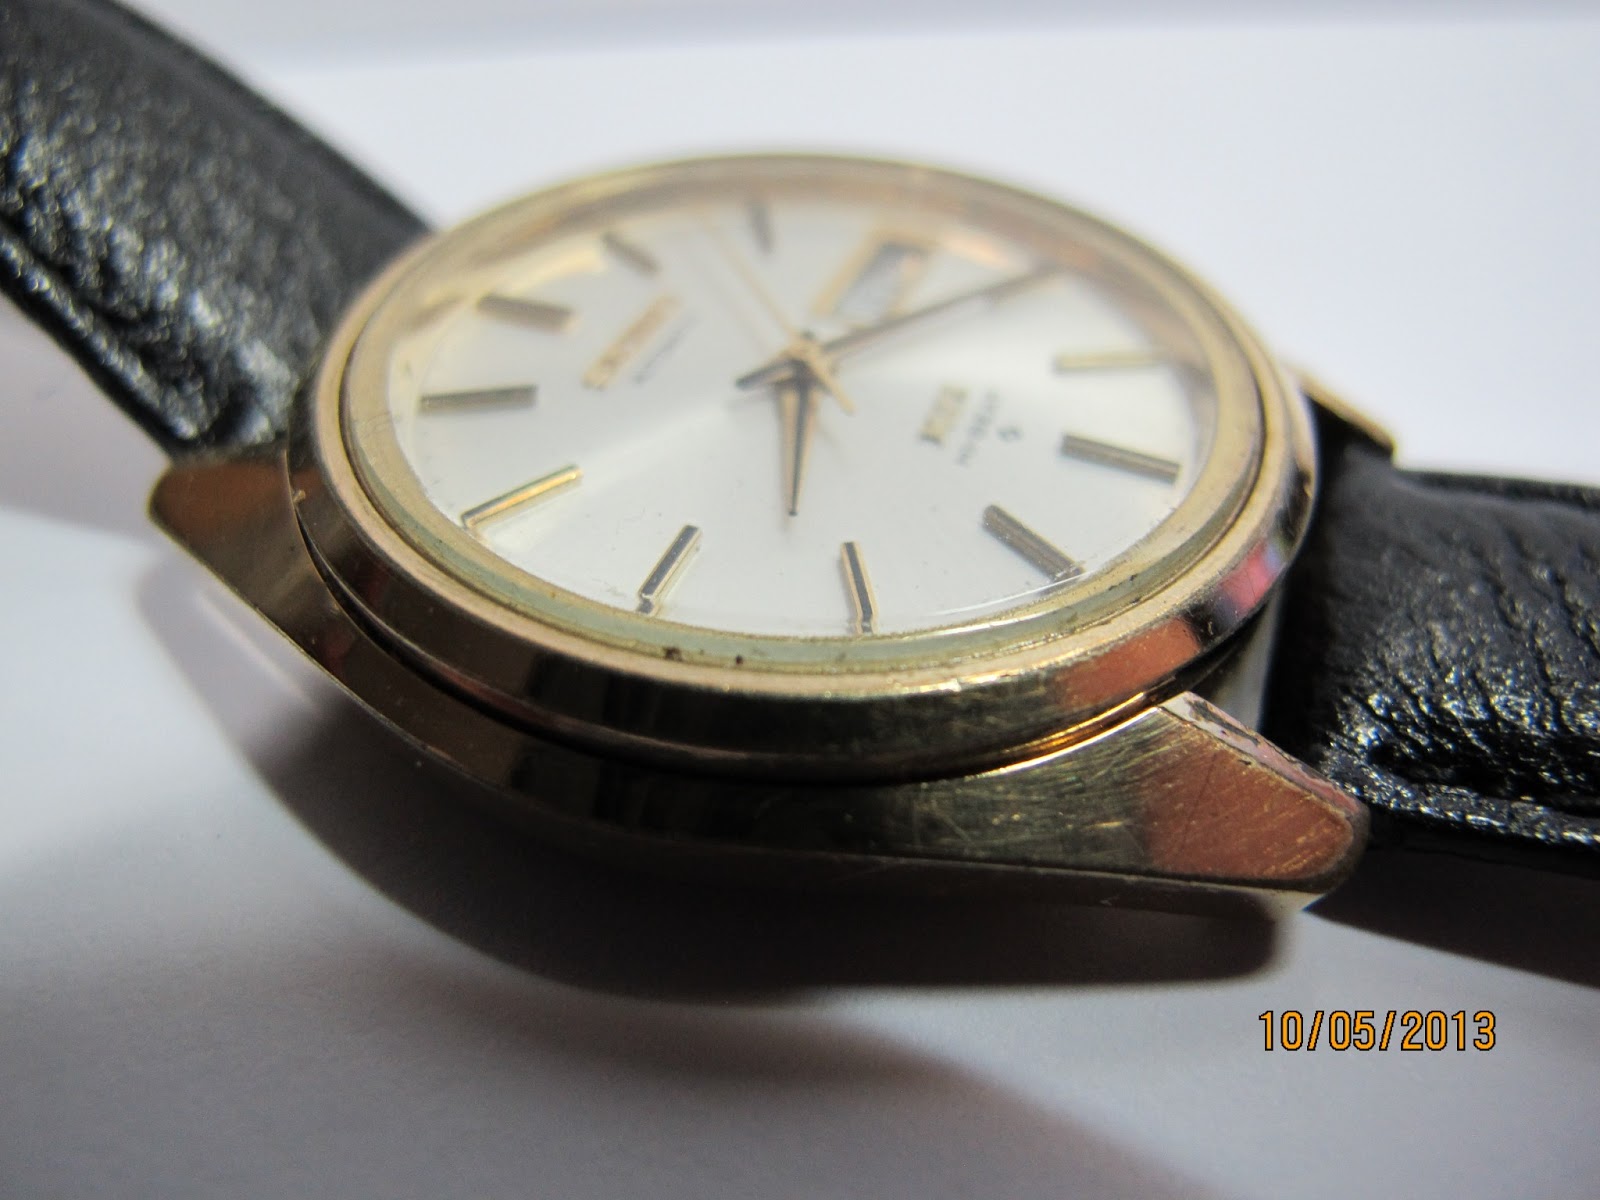 watchopenia: Something is not right with this 56 King Seiko